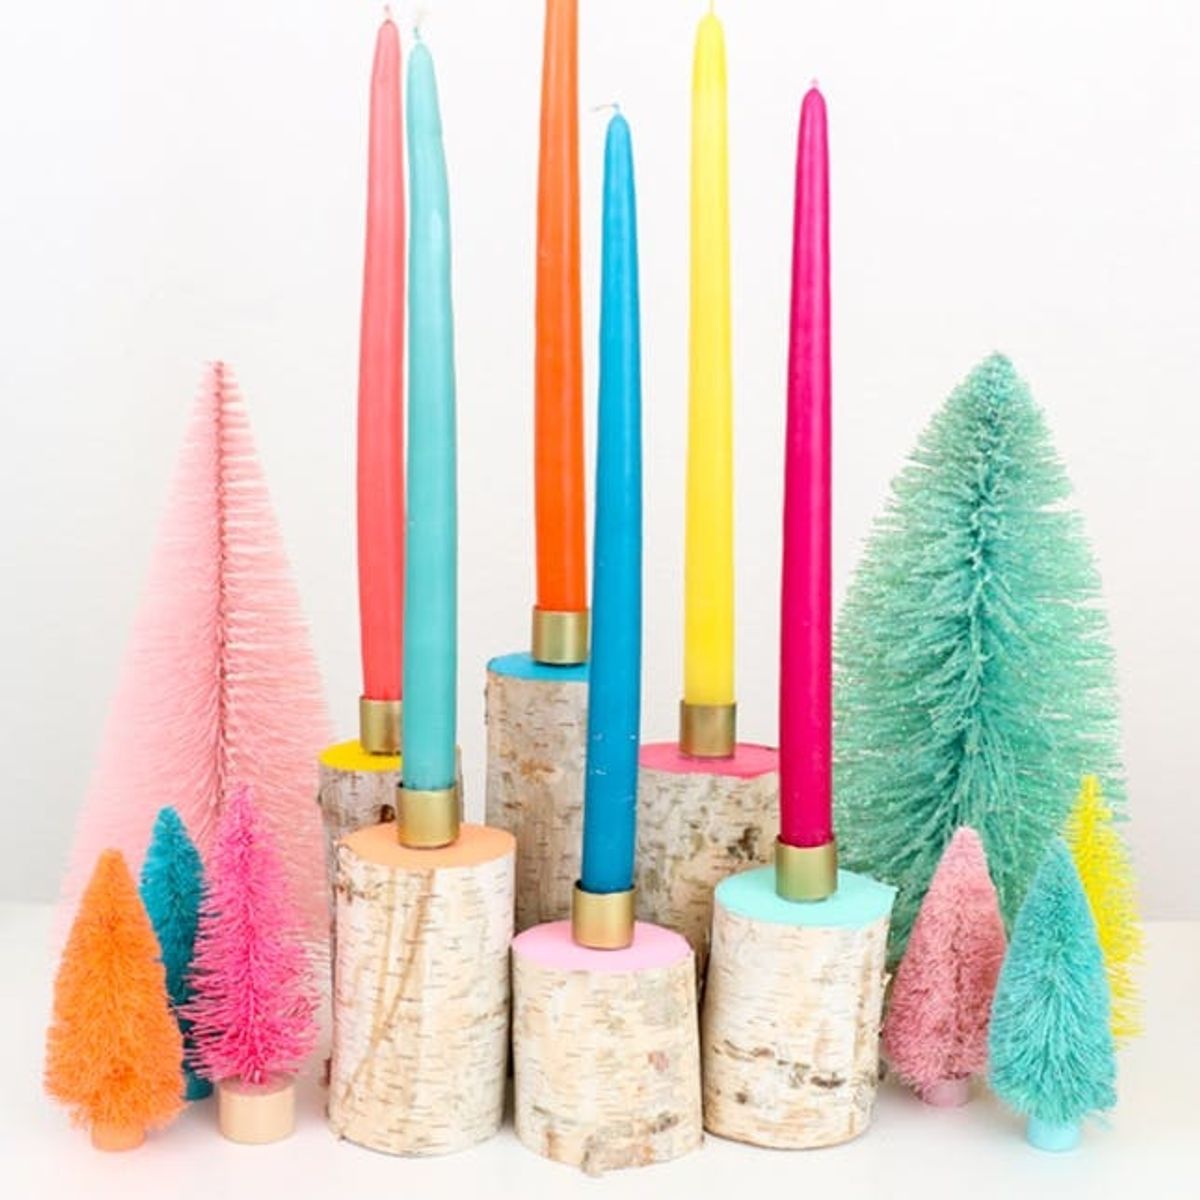 14 Holiday Mantel Decor Trends We’re Seeing This Year